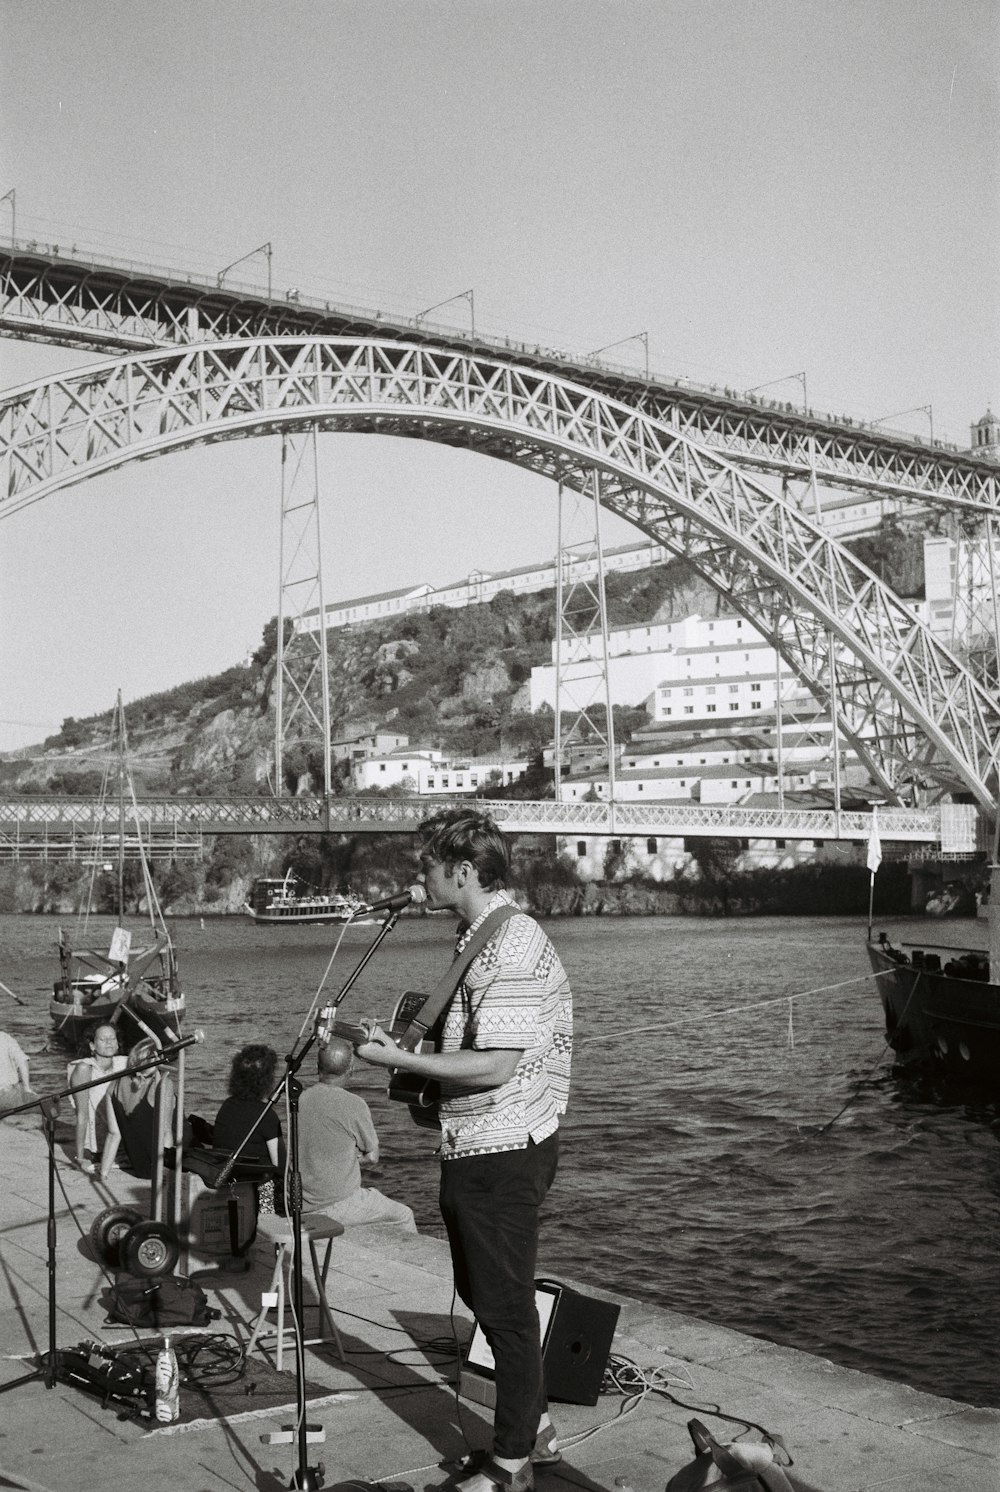 a man playing a guitar on a boat in front of a bridge